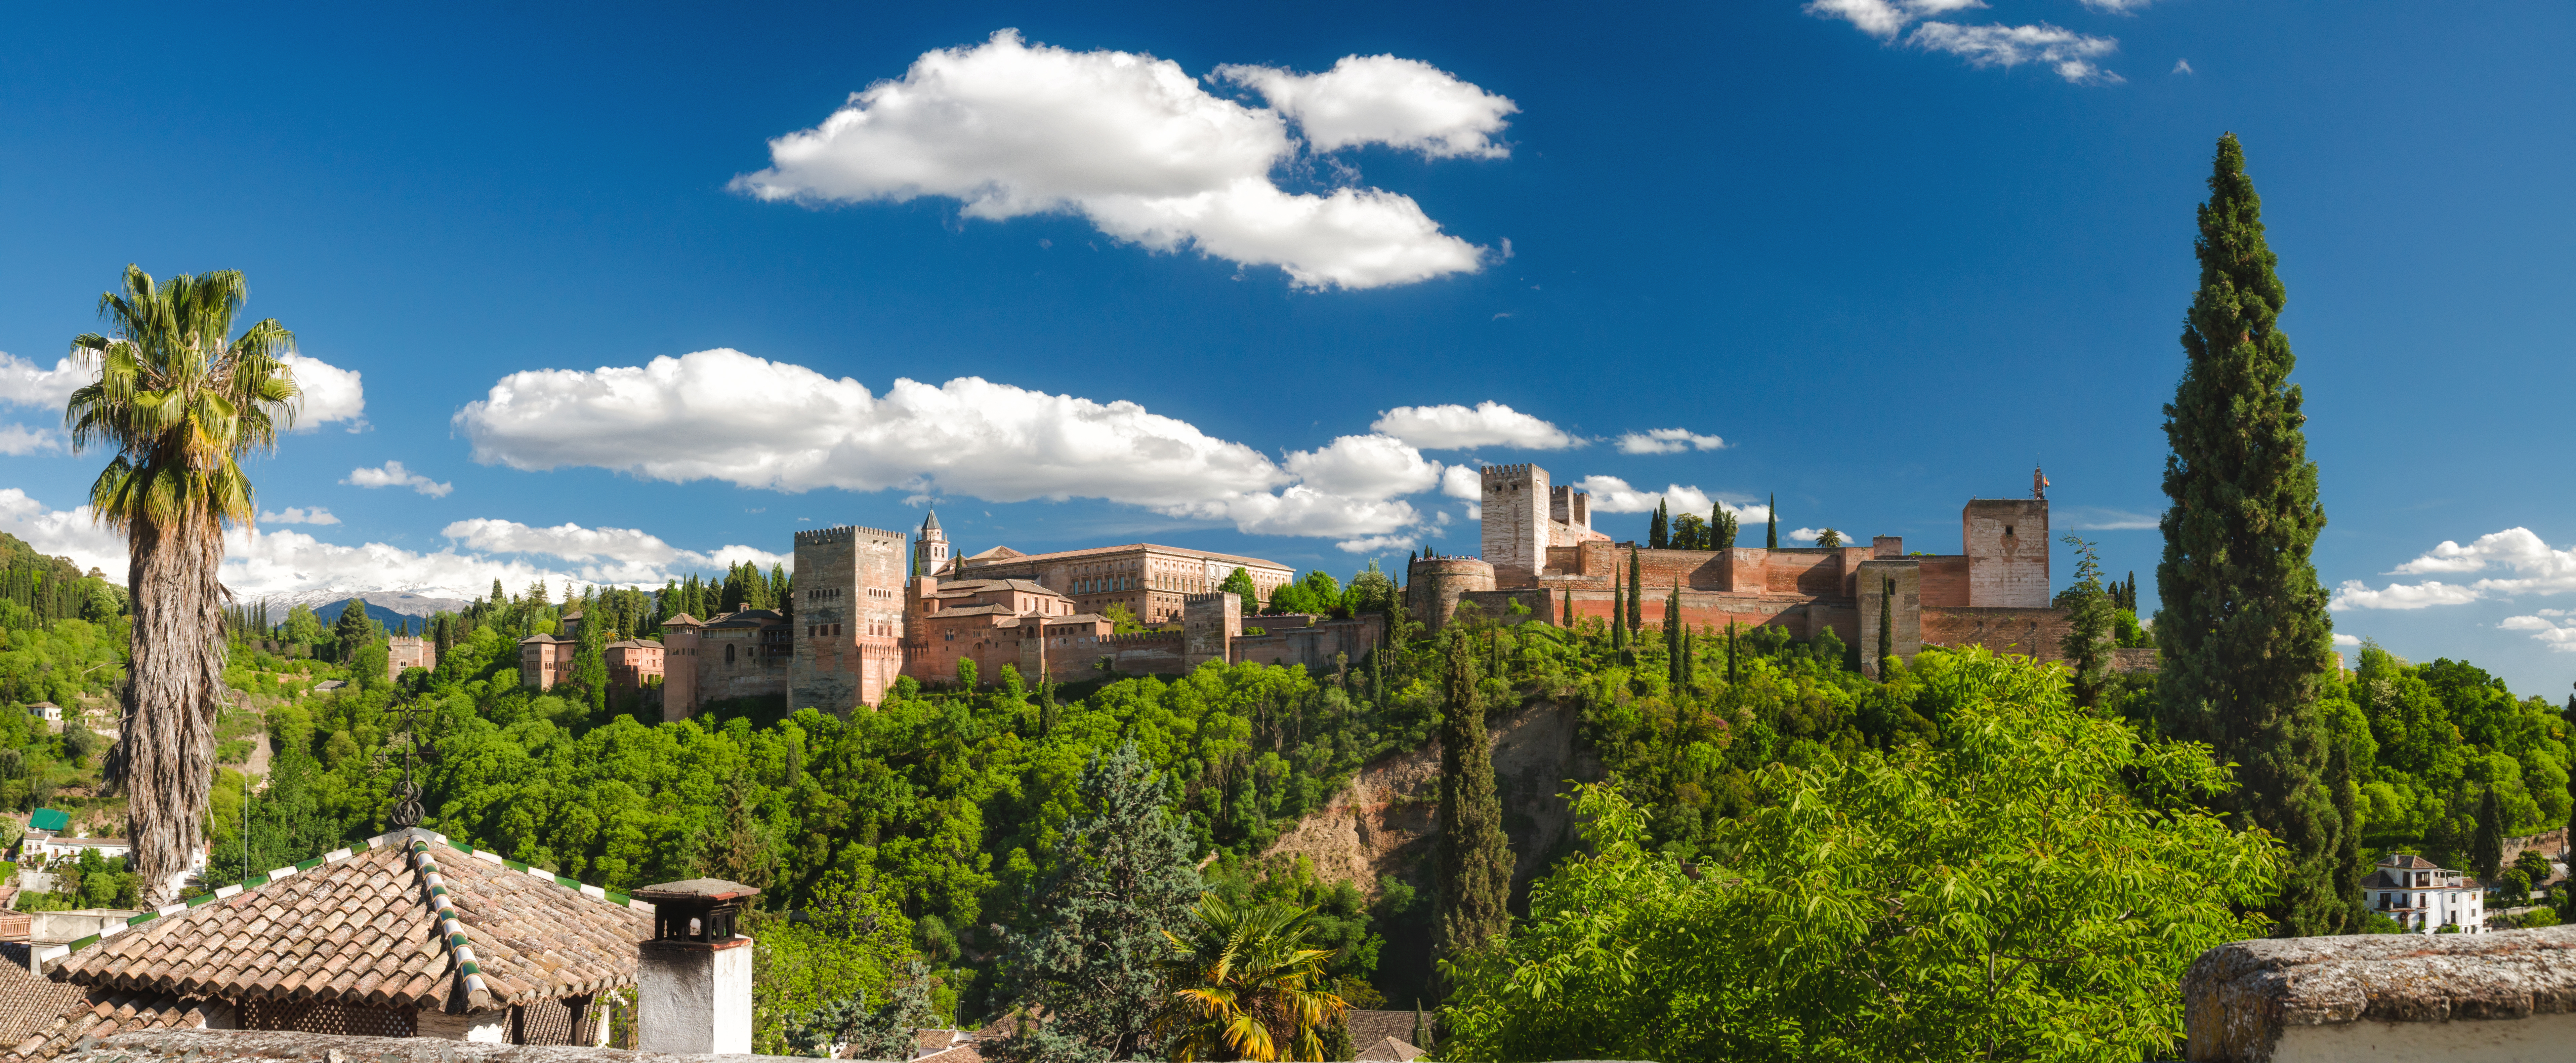 Famous ancient arabic fortress of Alhambra in Granada, Spain.